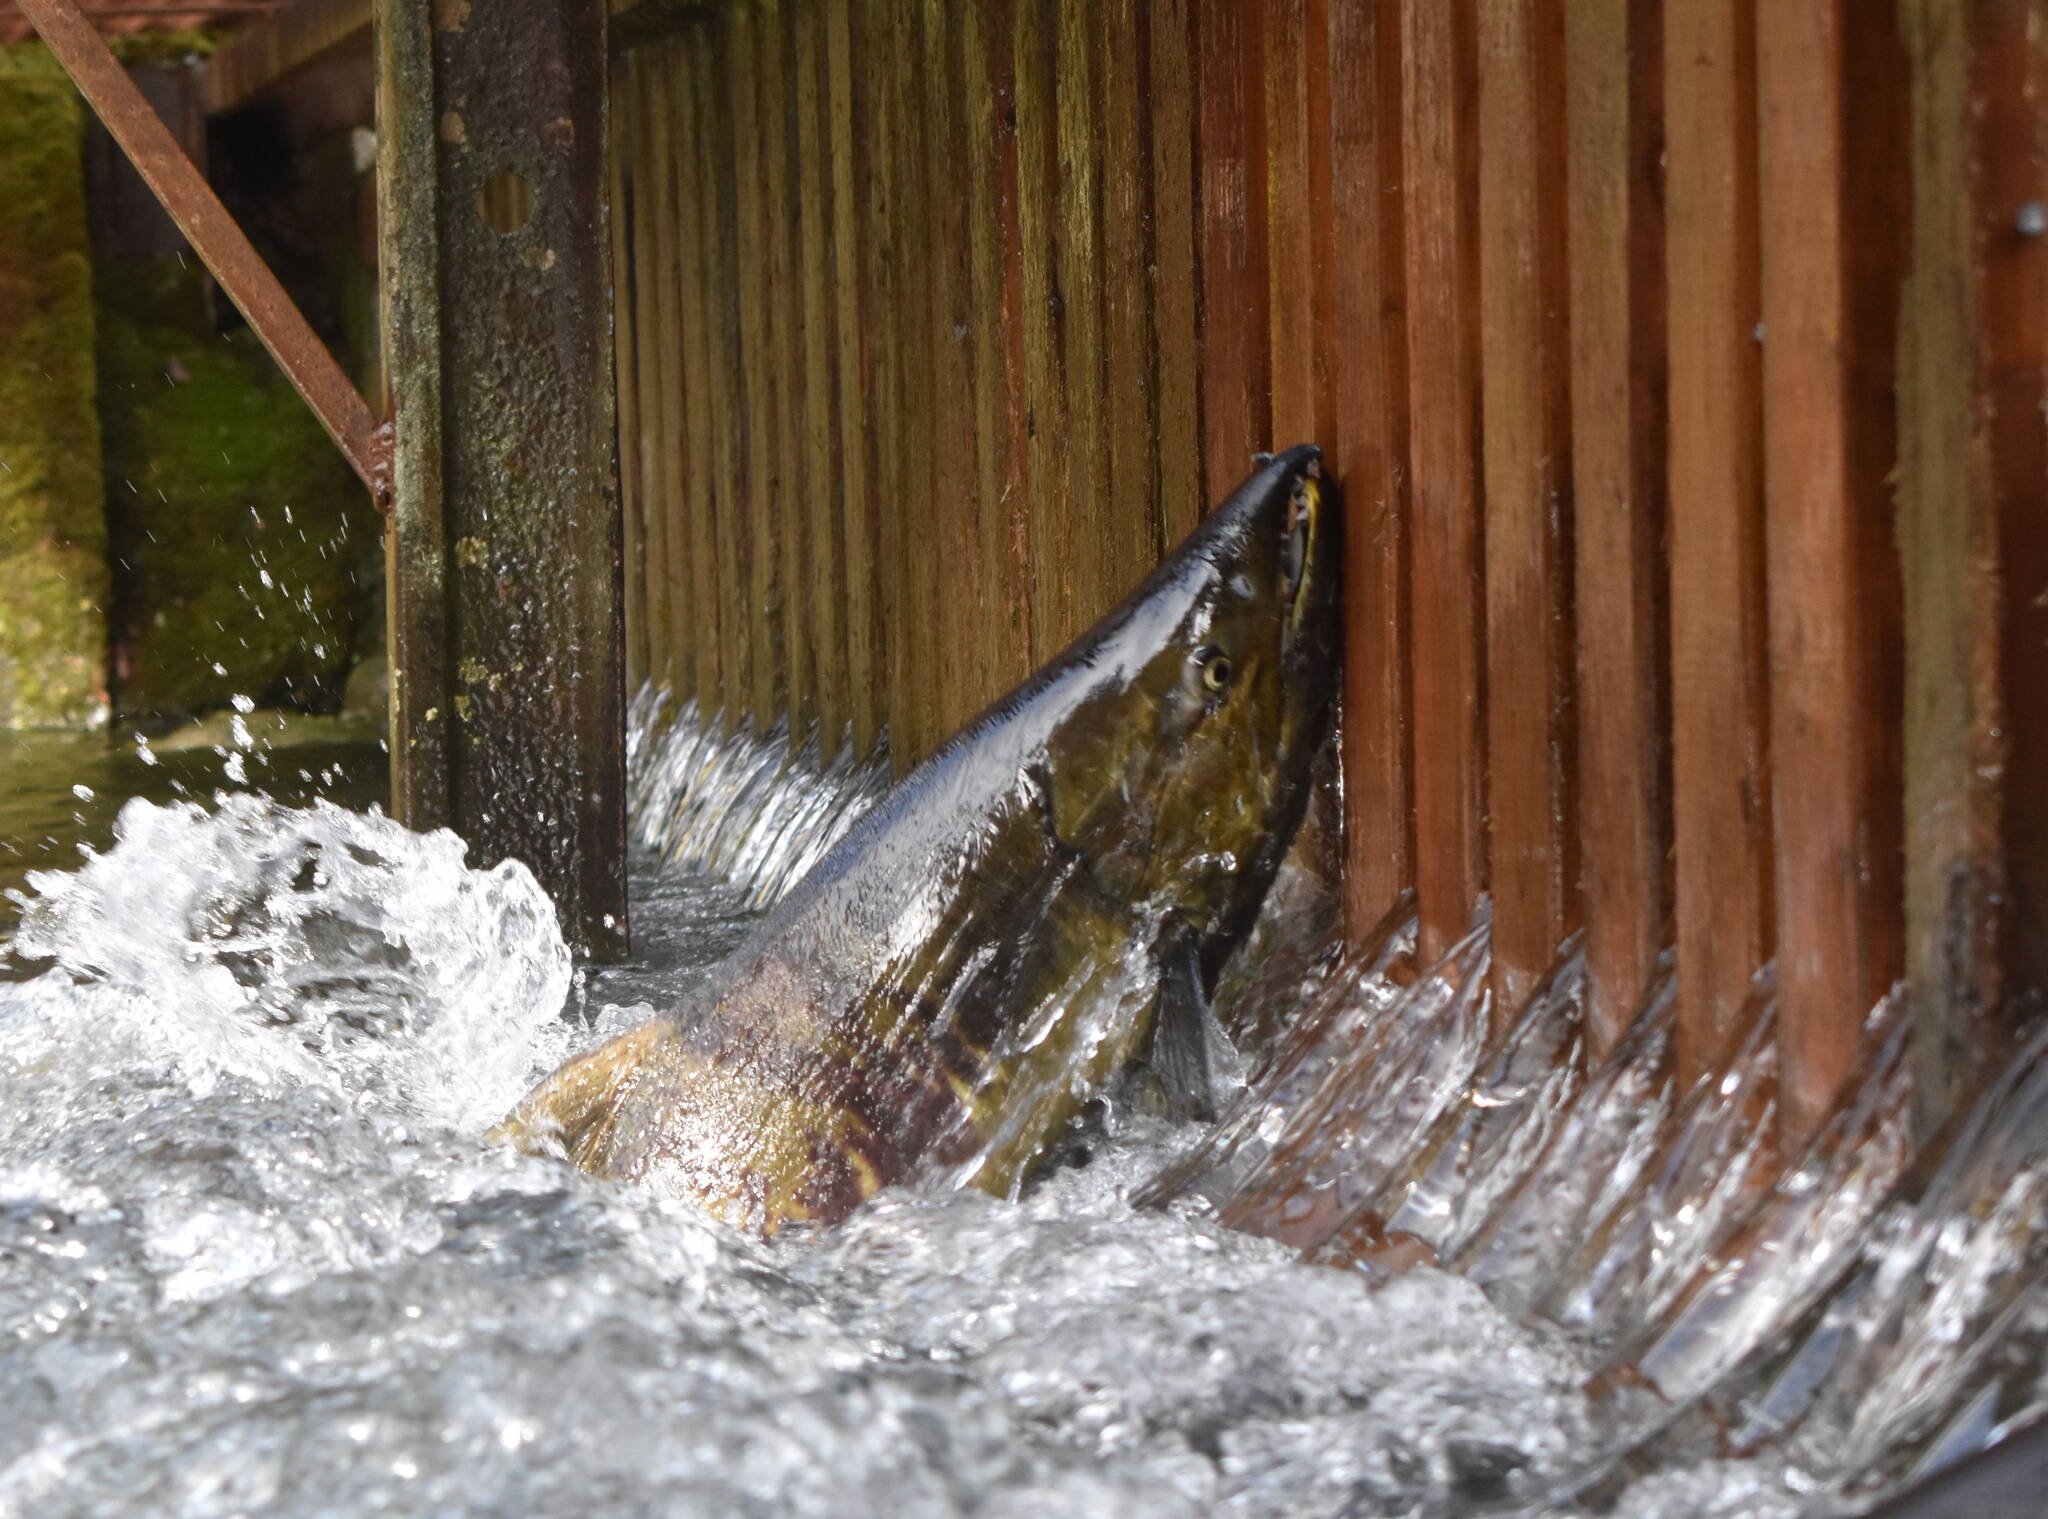 Clayton Franke / The Daily World
An adult chum salmon attempts to swim through a wooden weir at the Satsop Springs Hatchery on Saturday, Nov. 4.